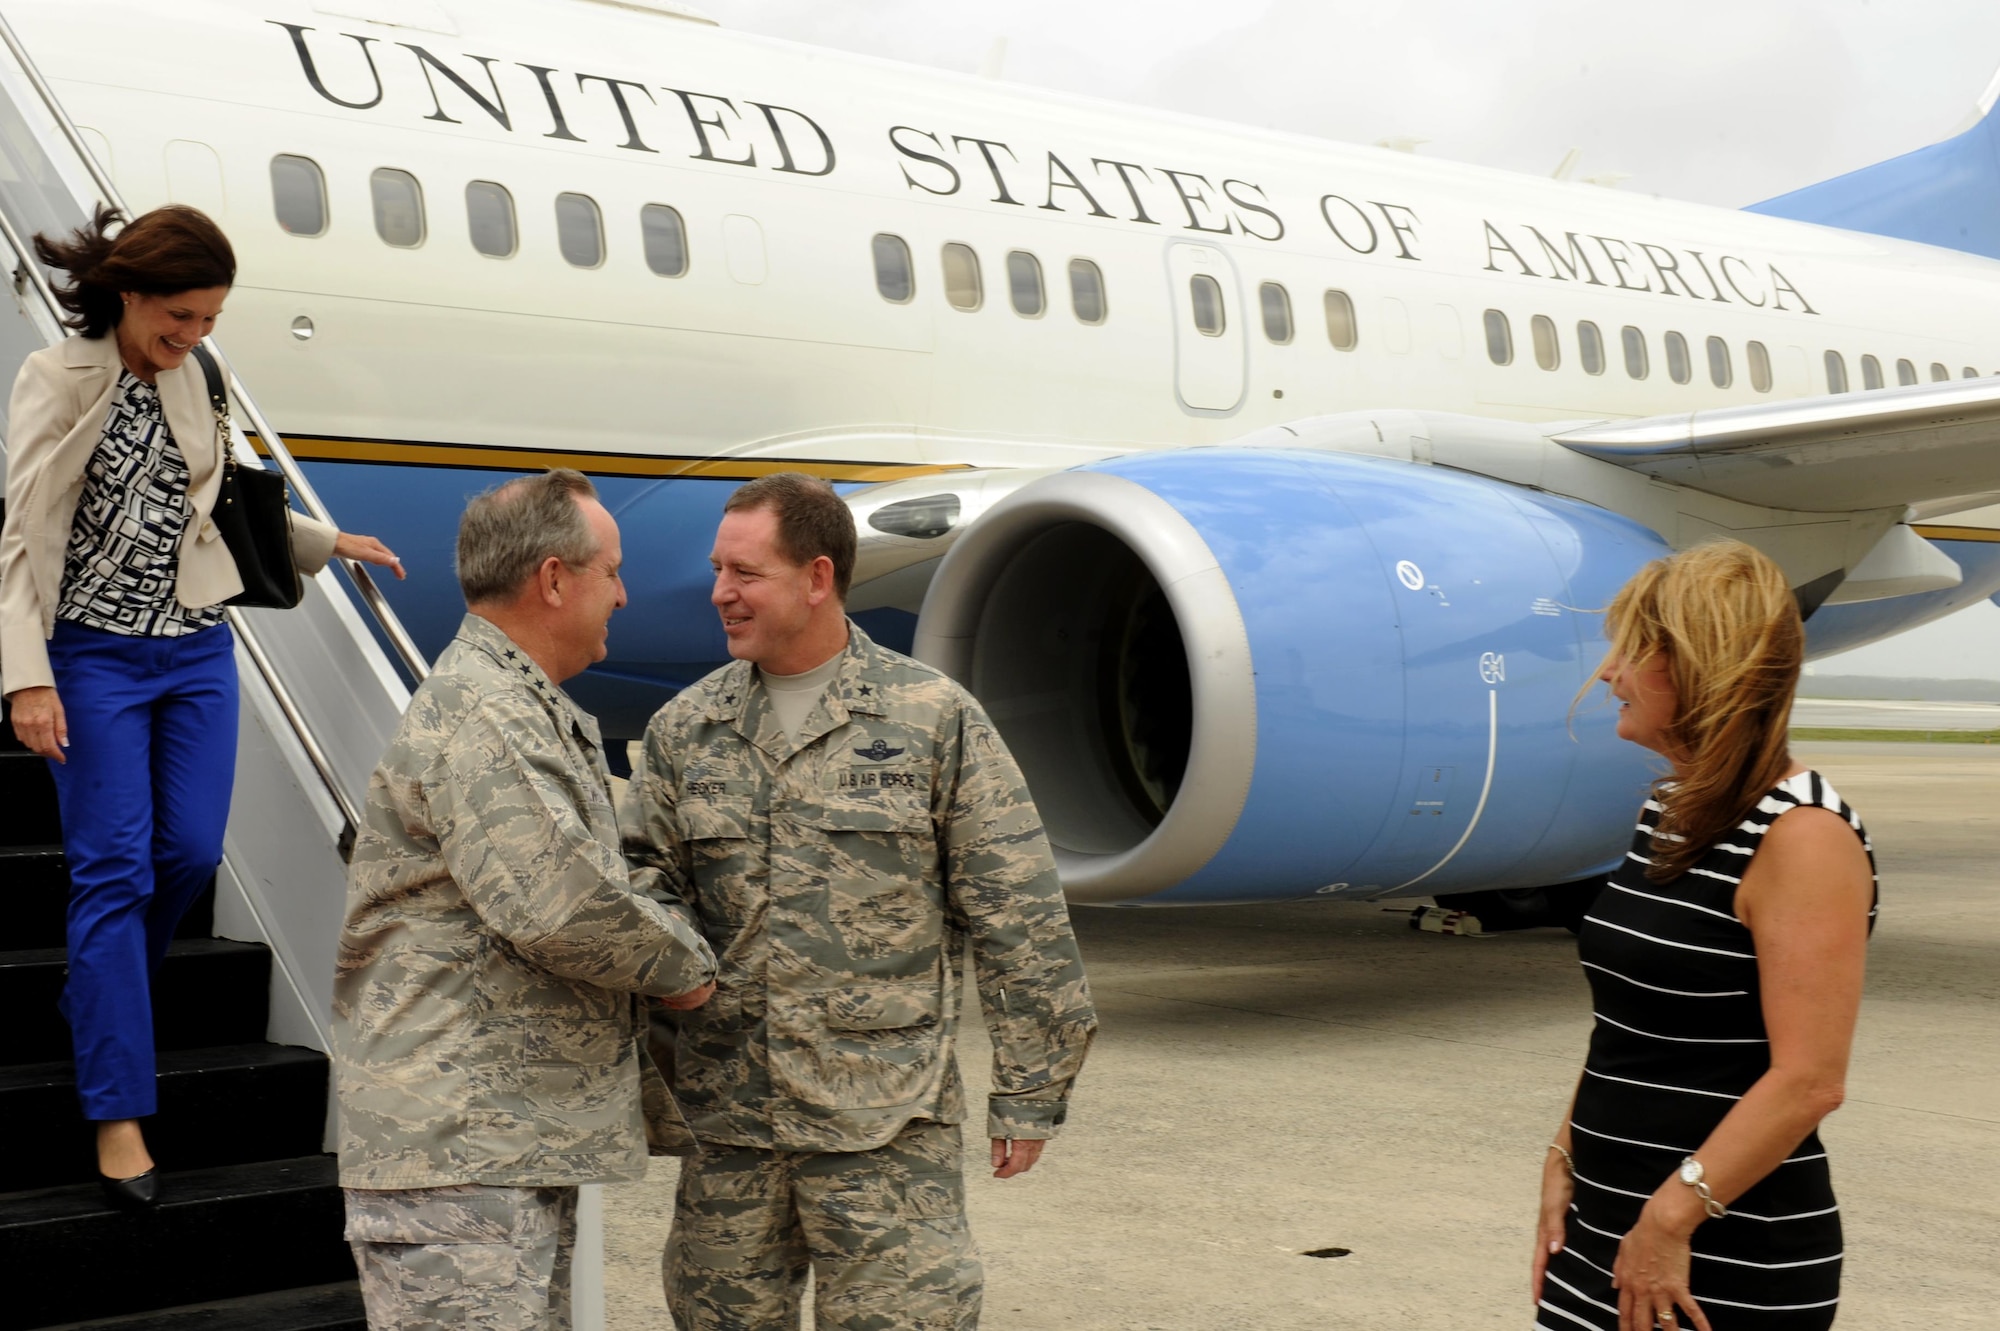 Air Force Chief of Staff Gen. Mark A. Welsh III is greeted by Brig. Gen. James Hecker Aug. 21, 2013, upon arrival to Kadena Air Base, Japan. During the visit, Welsh III and Chief Master Sergeant of the Air Force James A. Cody visited several units around the base and hosted an Airman’s call with 18th Wing Airmen, where they awarded five Distinguished Flying Crosses with valor. Welsh and Cody visited Kadena as part of a two-week visit to the region to thank Airmen and their families and discuss challenges and opportunities in the Pacific. (U.S. Air Force photo/Senior Airman Maeson L. Elleman)